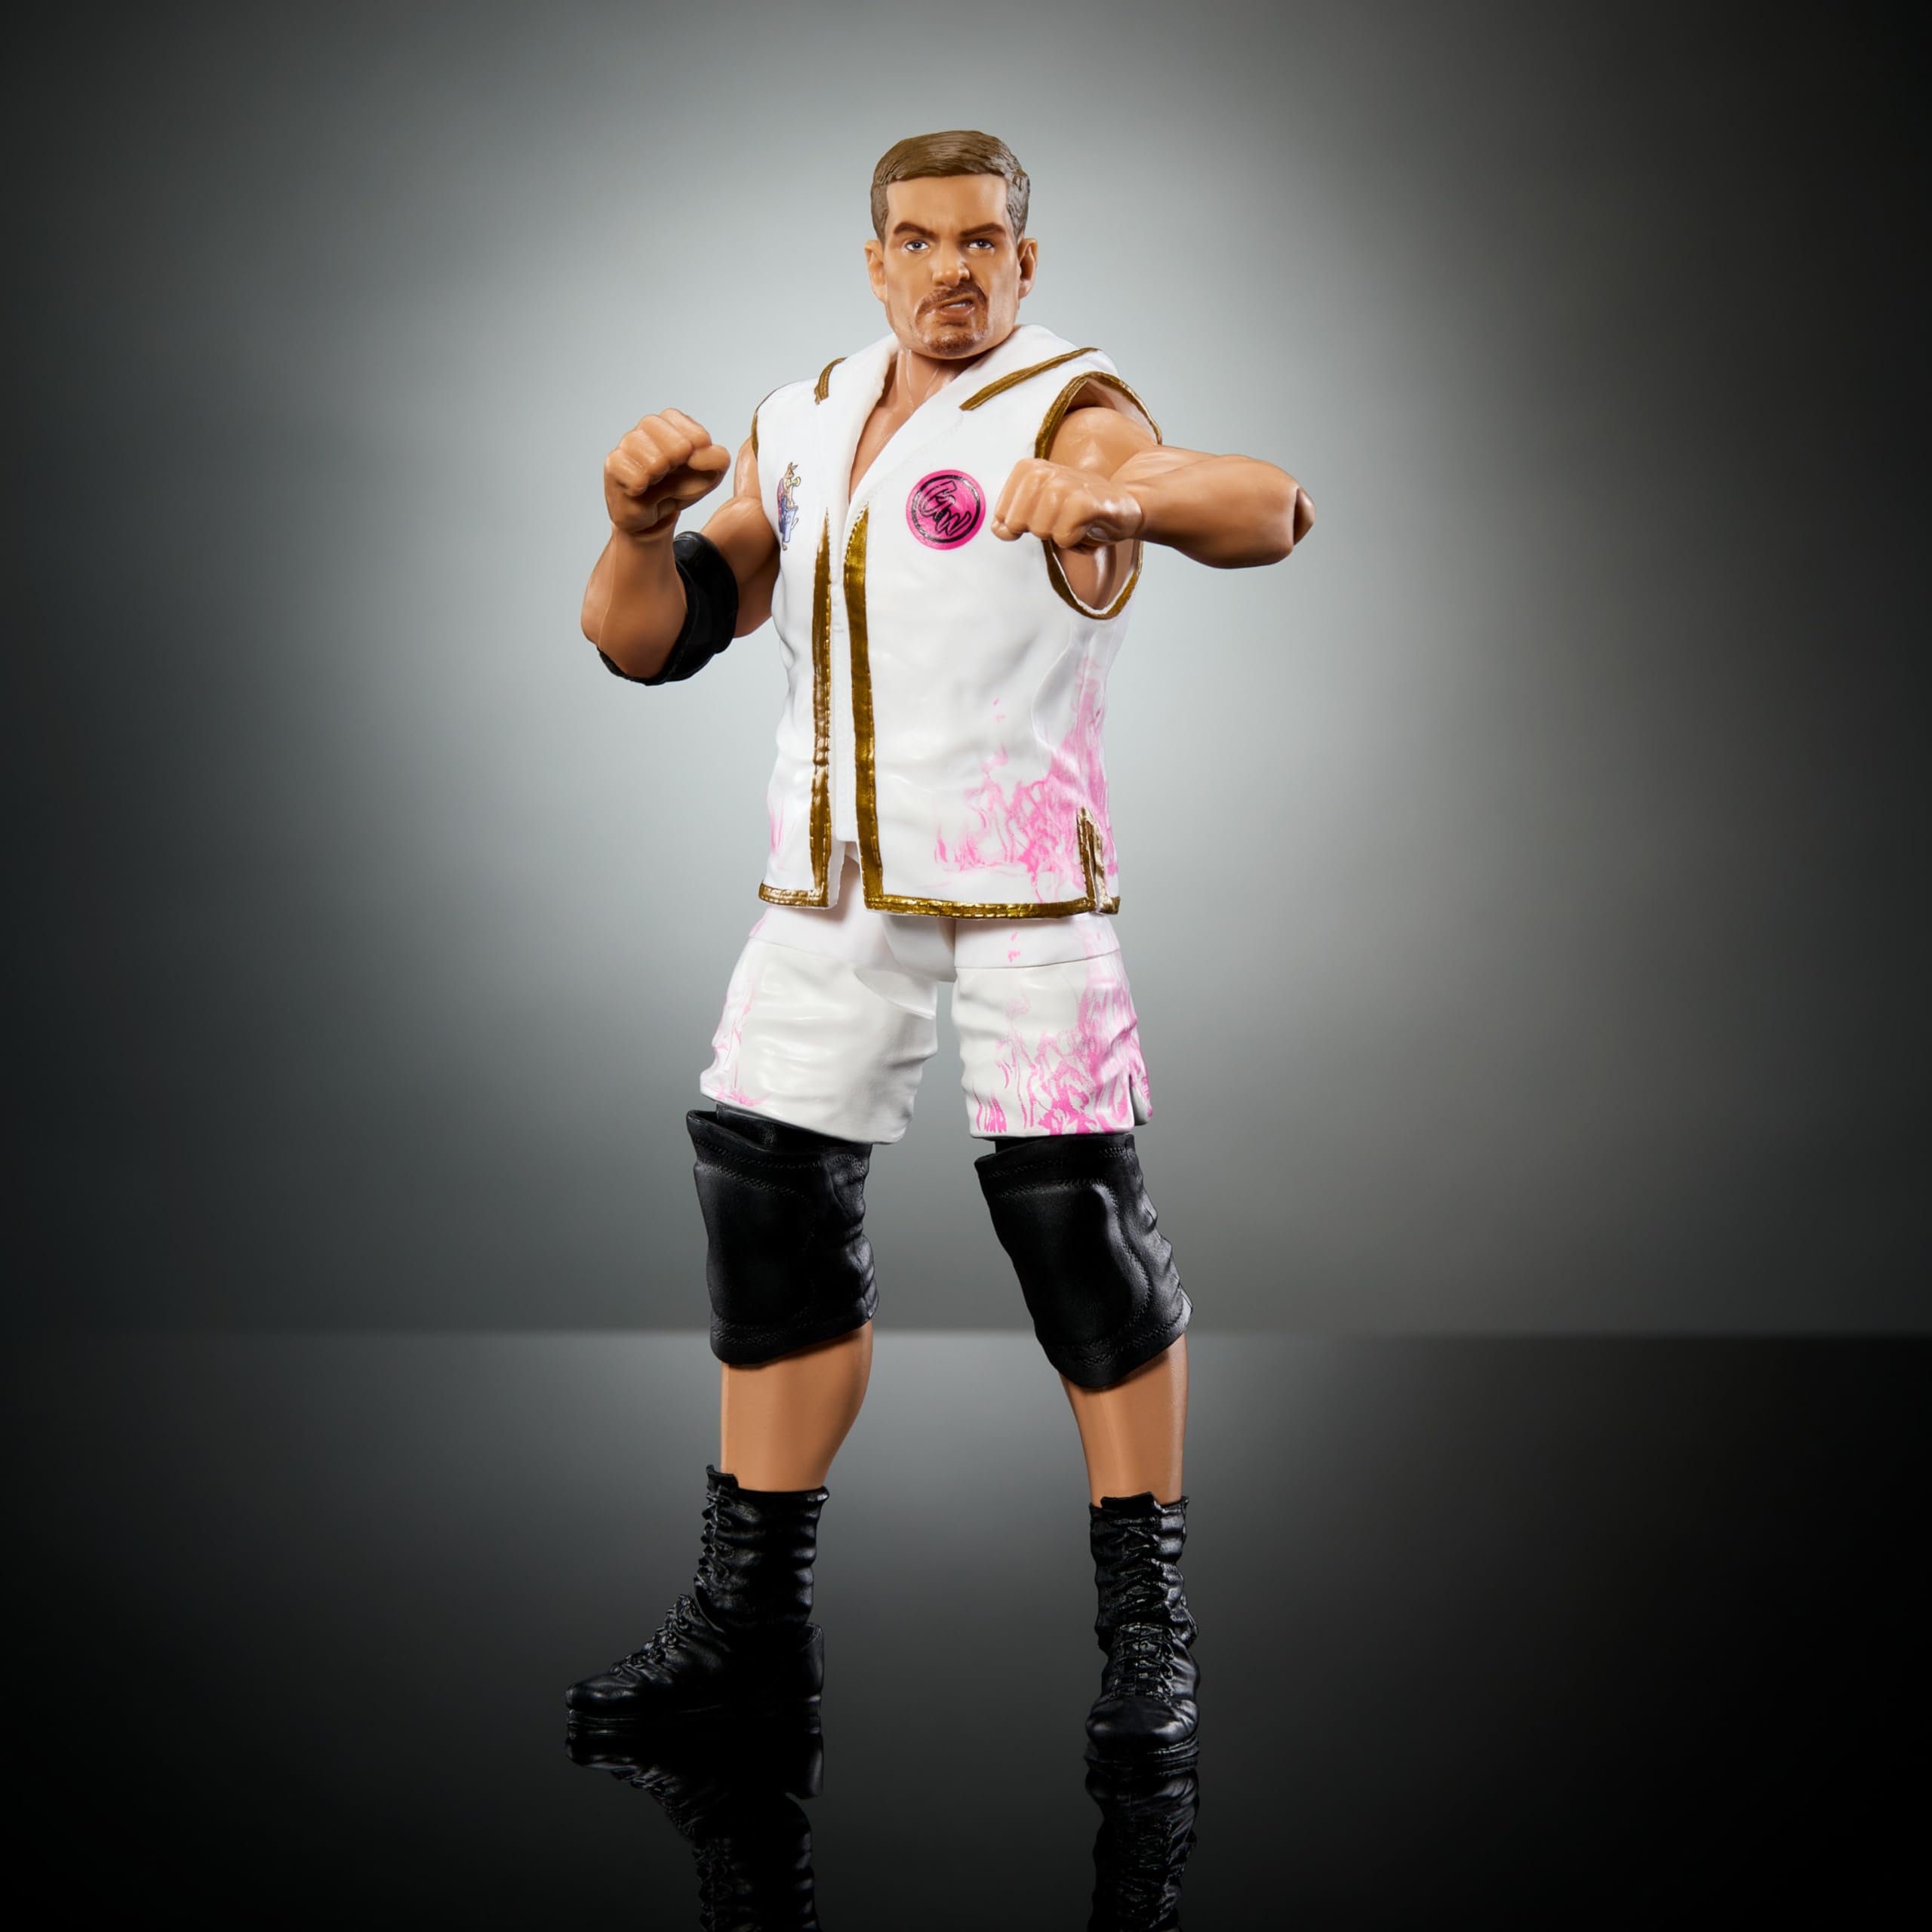 WWE Elite Action Figure & Accessories, 6-inch Collectible Grayson Waller with 25 Articulation Points, Life-Like Look & Swappable Hands